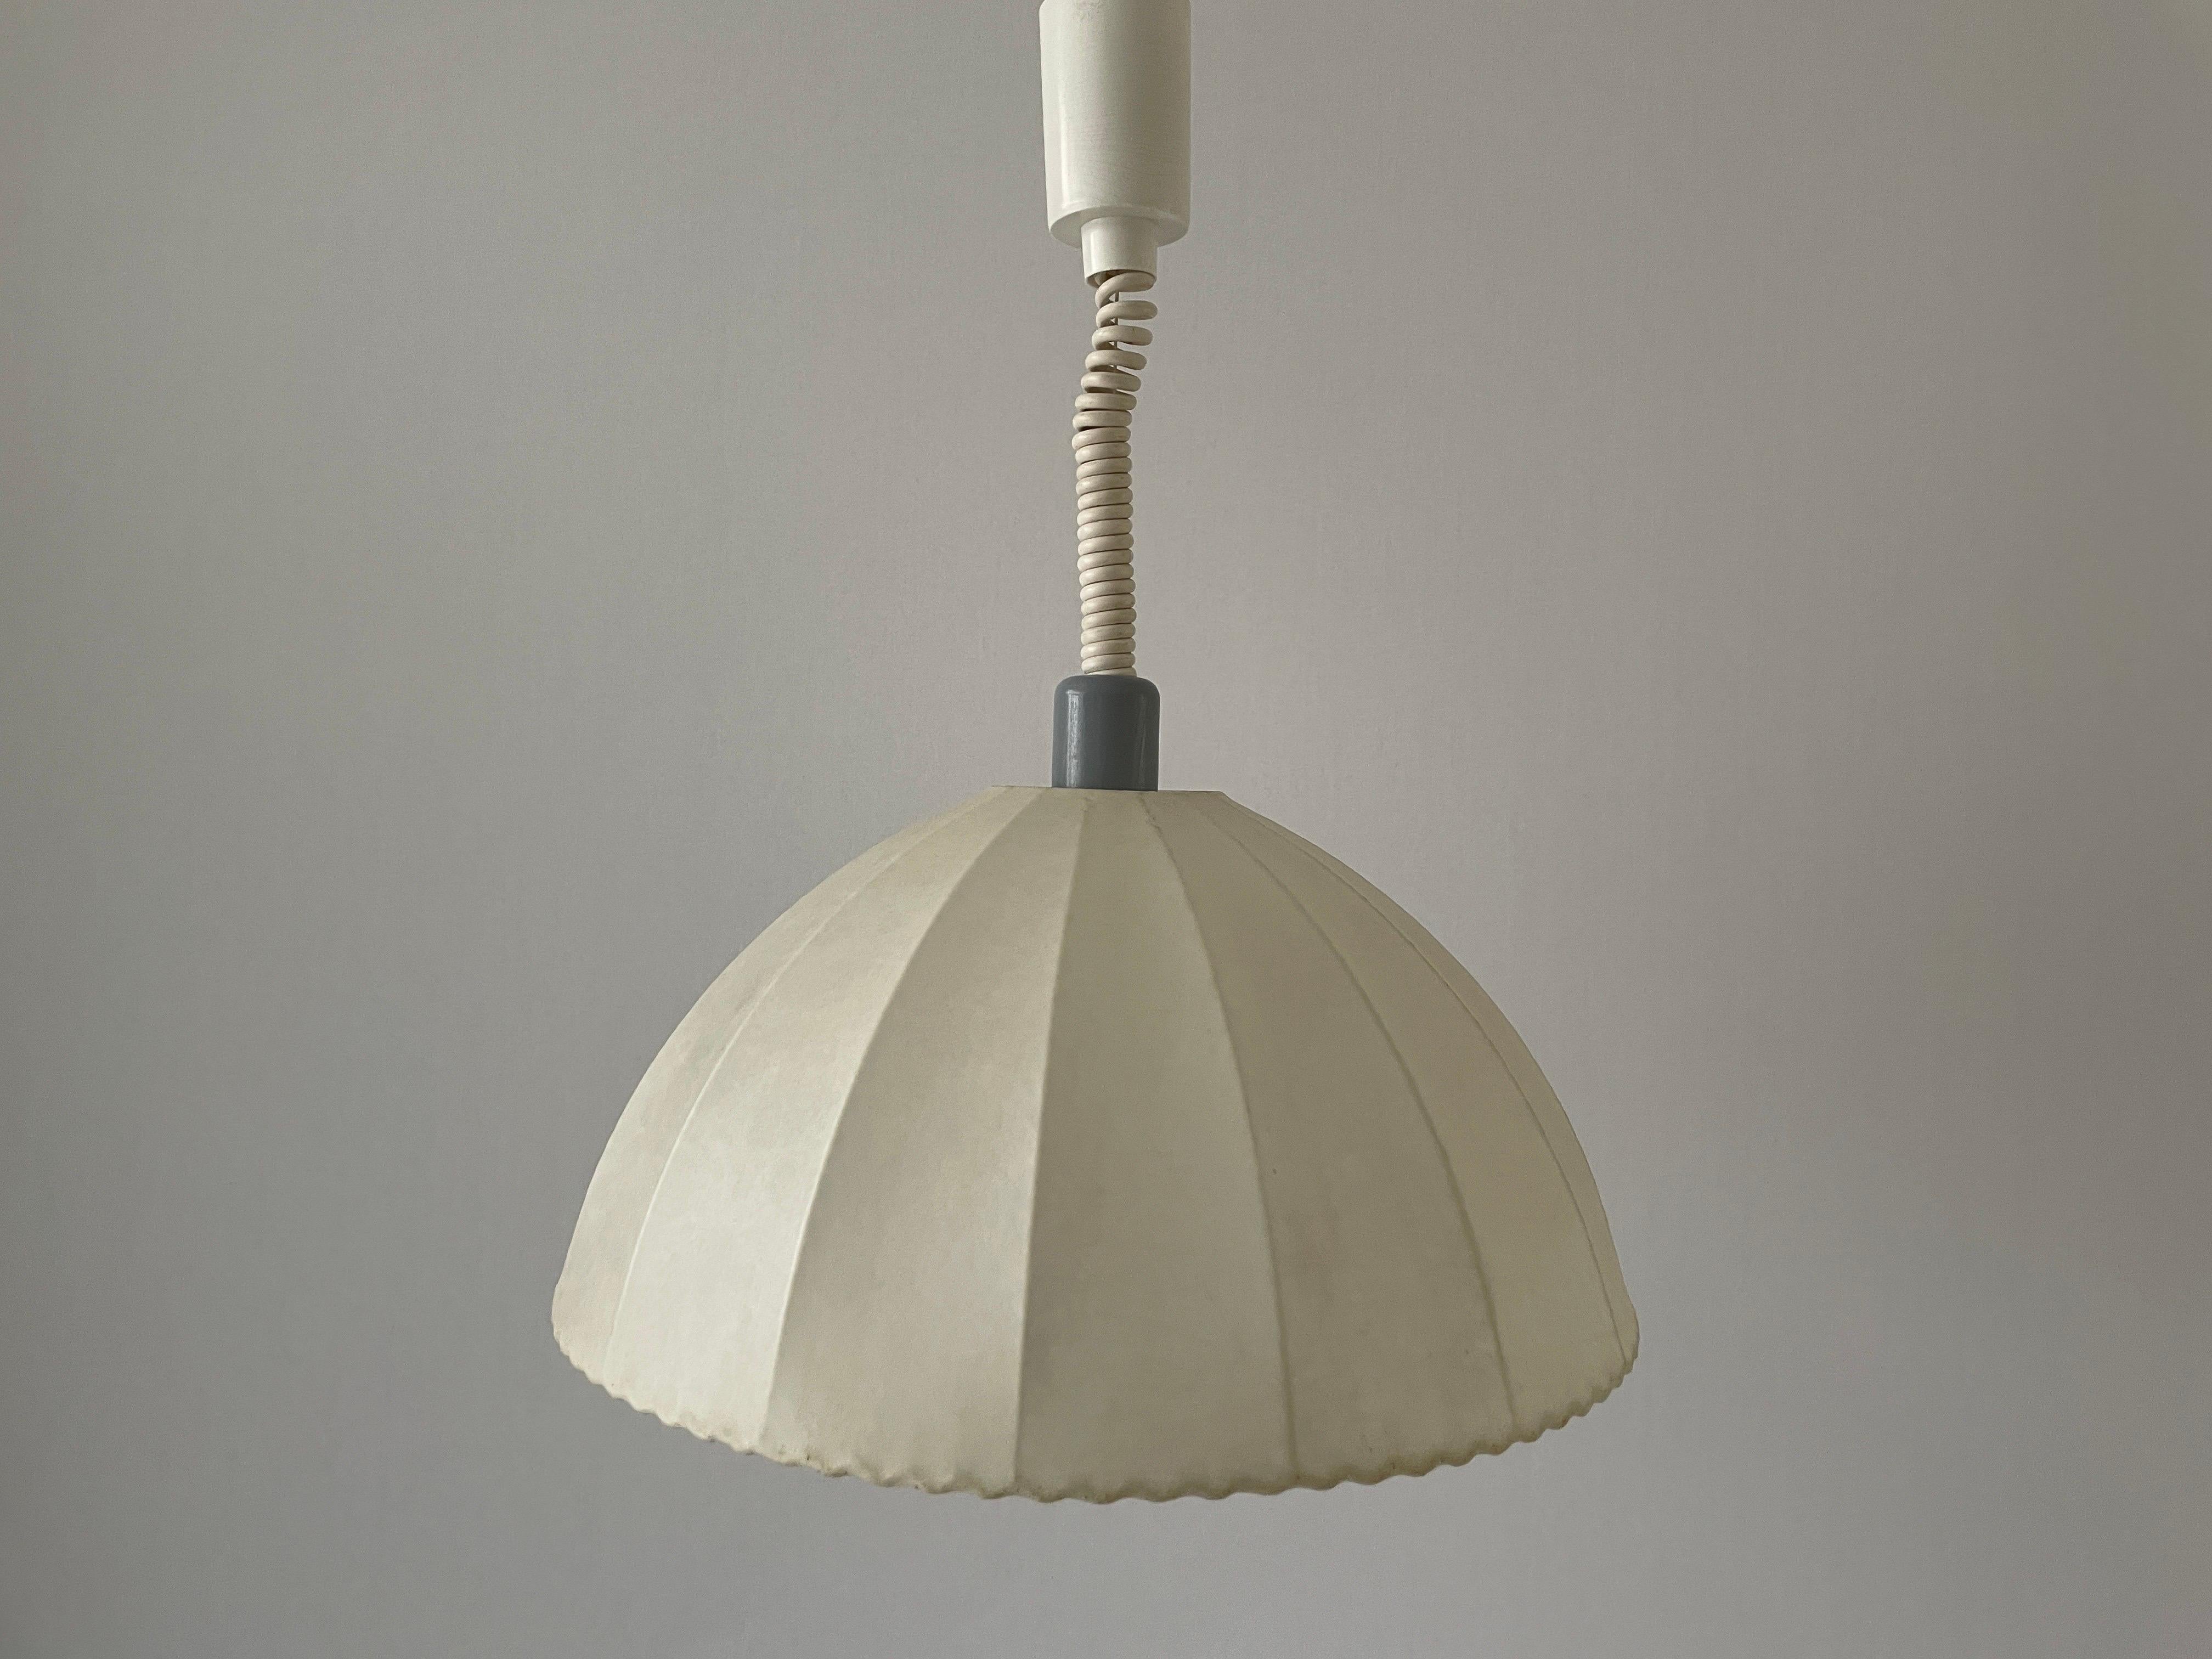 Cocoon Pendant Lamp by Goldkant with Grey Metal top, 1960s, Germany

Lampshade is in very good vintage condition.

This lamp works with E27 light bulbs. 
Wired and suitable to use with 220V and 110V for all countries.

Measurements:
Shade diameter